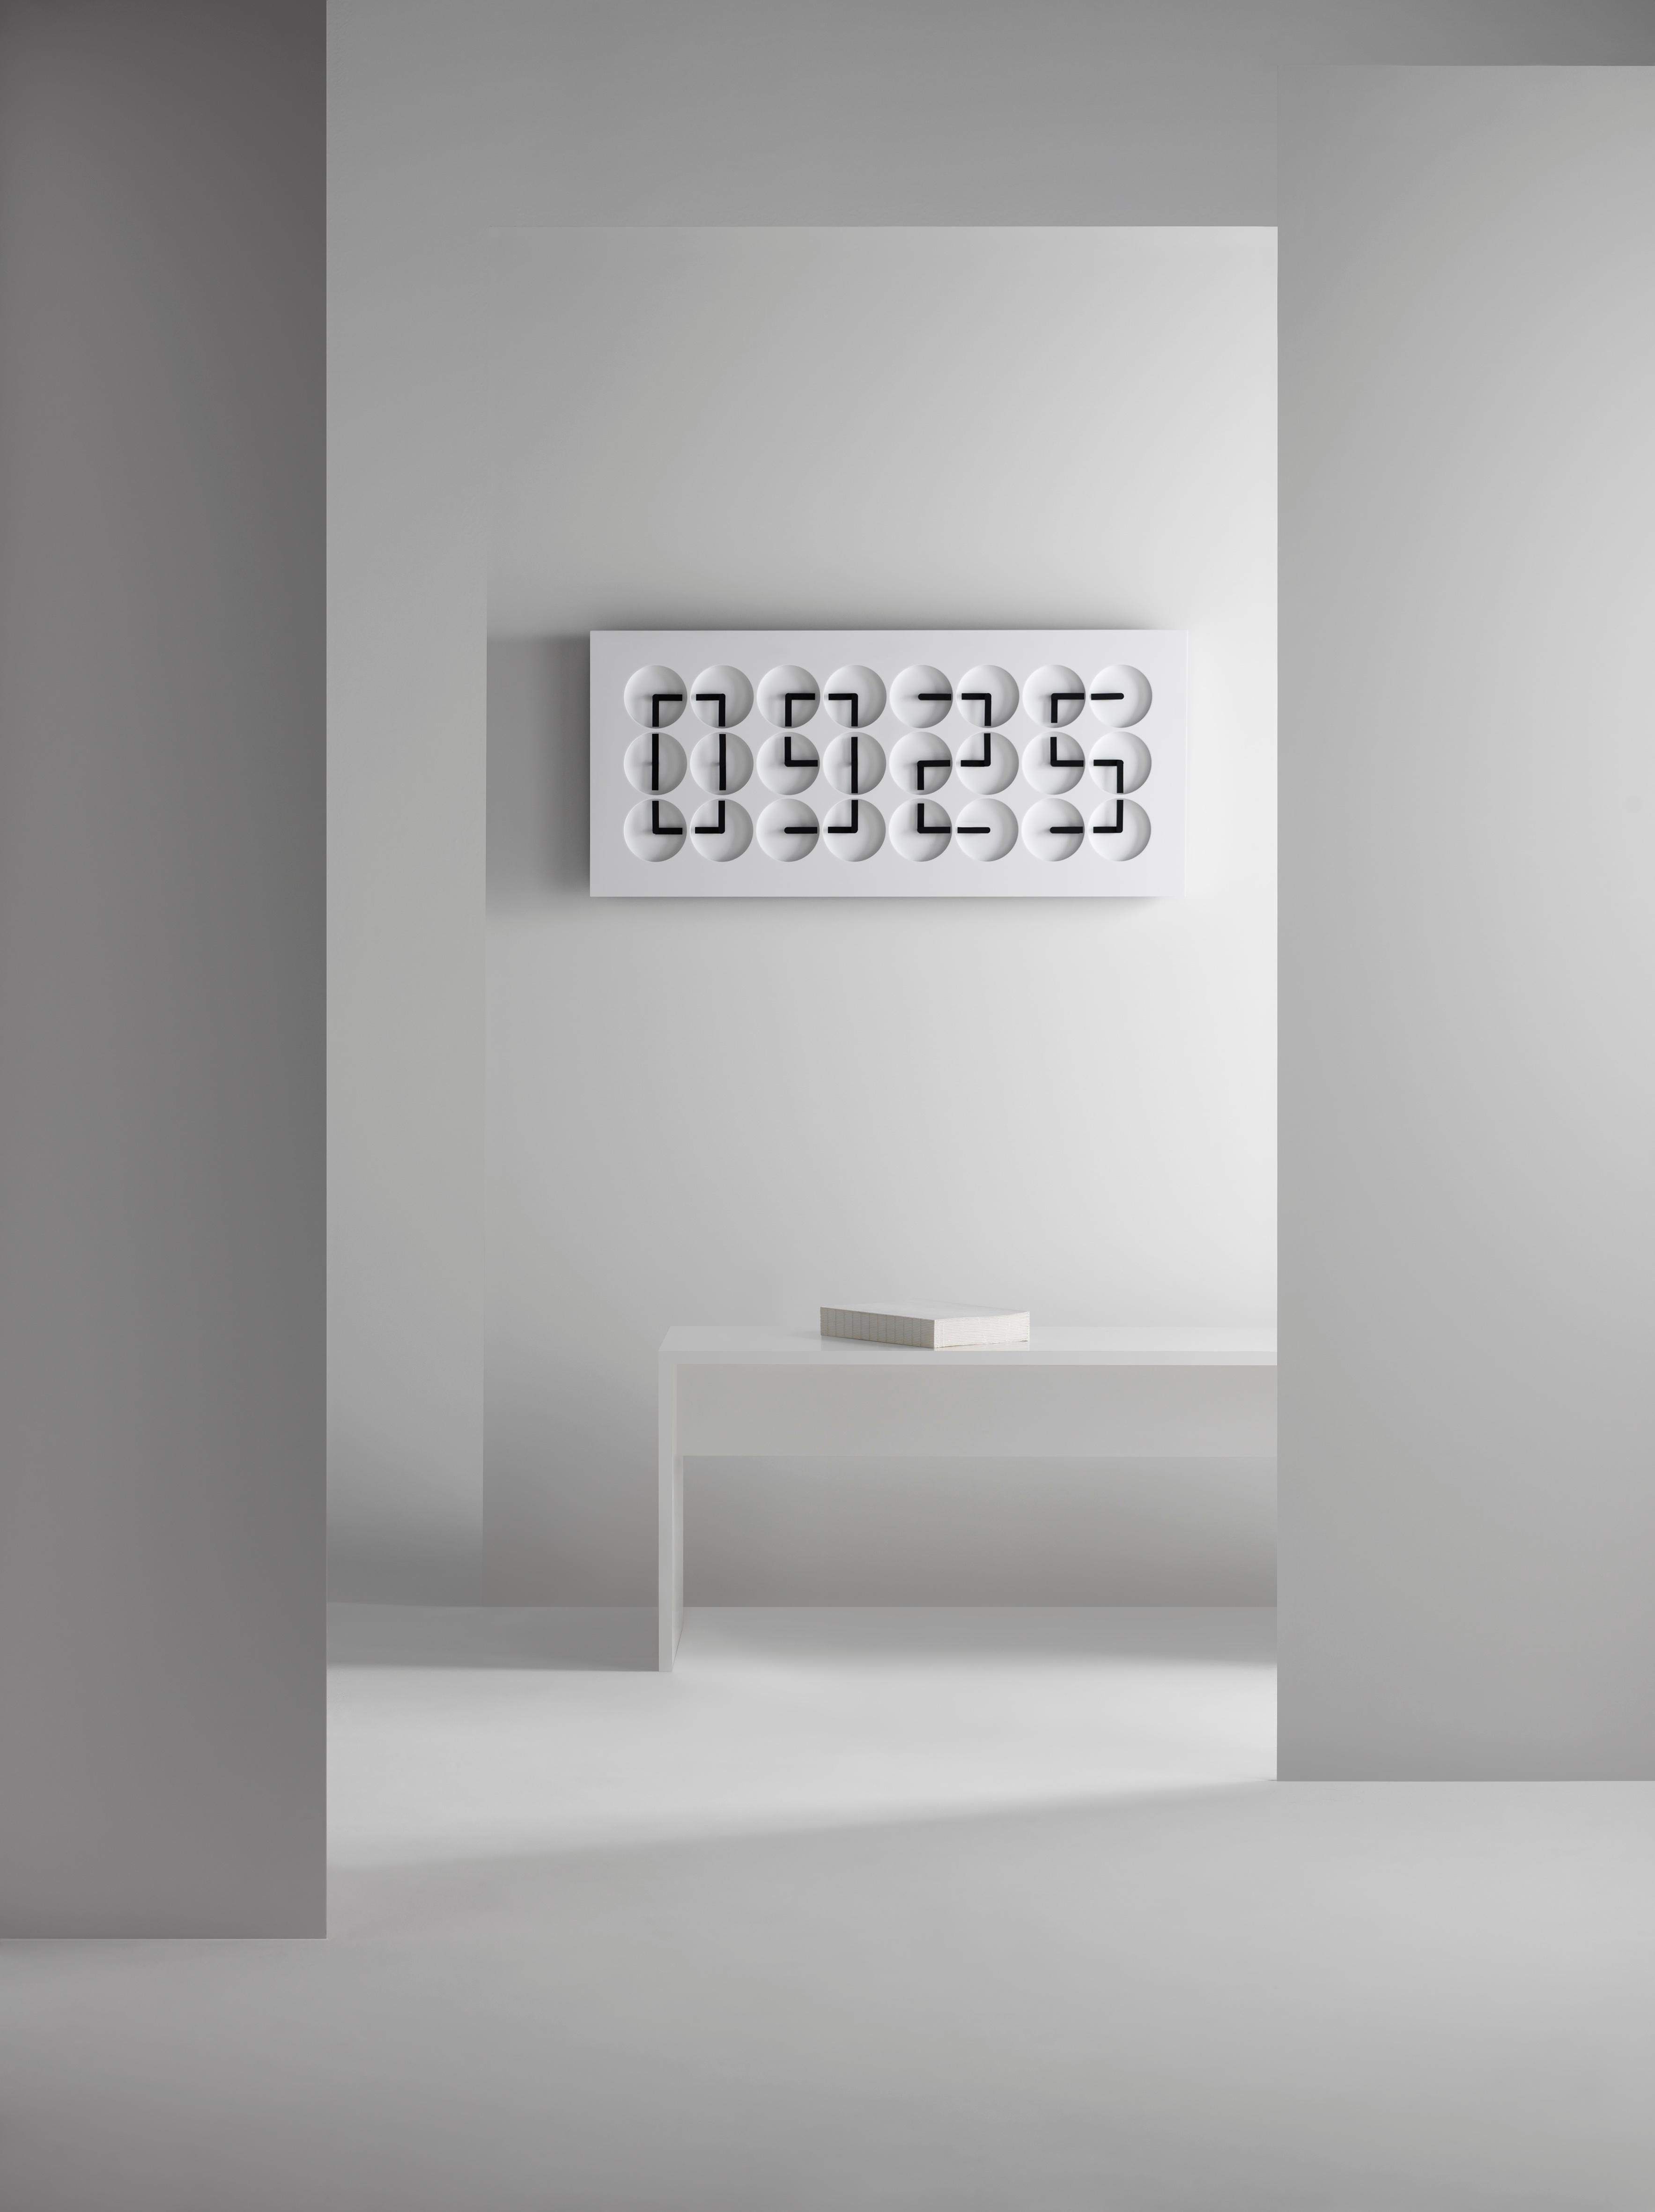 ClockClock 24 is both a kinetic sculpture and a functioning wall clock. It has been a signature piece of Humans since 1982 since it was first launched in 2016. The individual clock hands veer from unpredictable, mechanical spinning to perfect